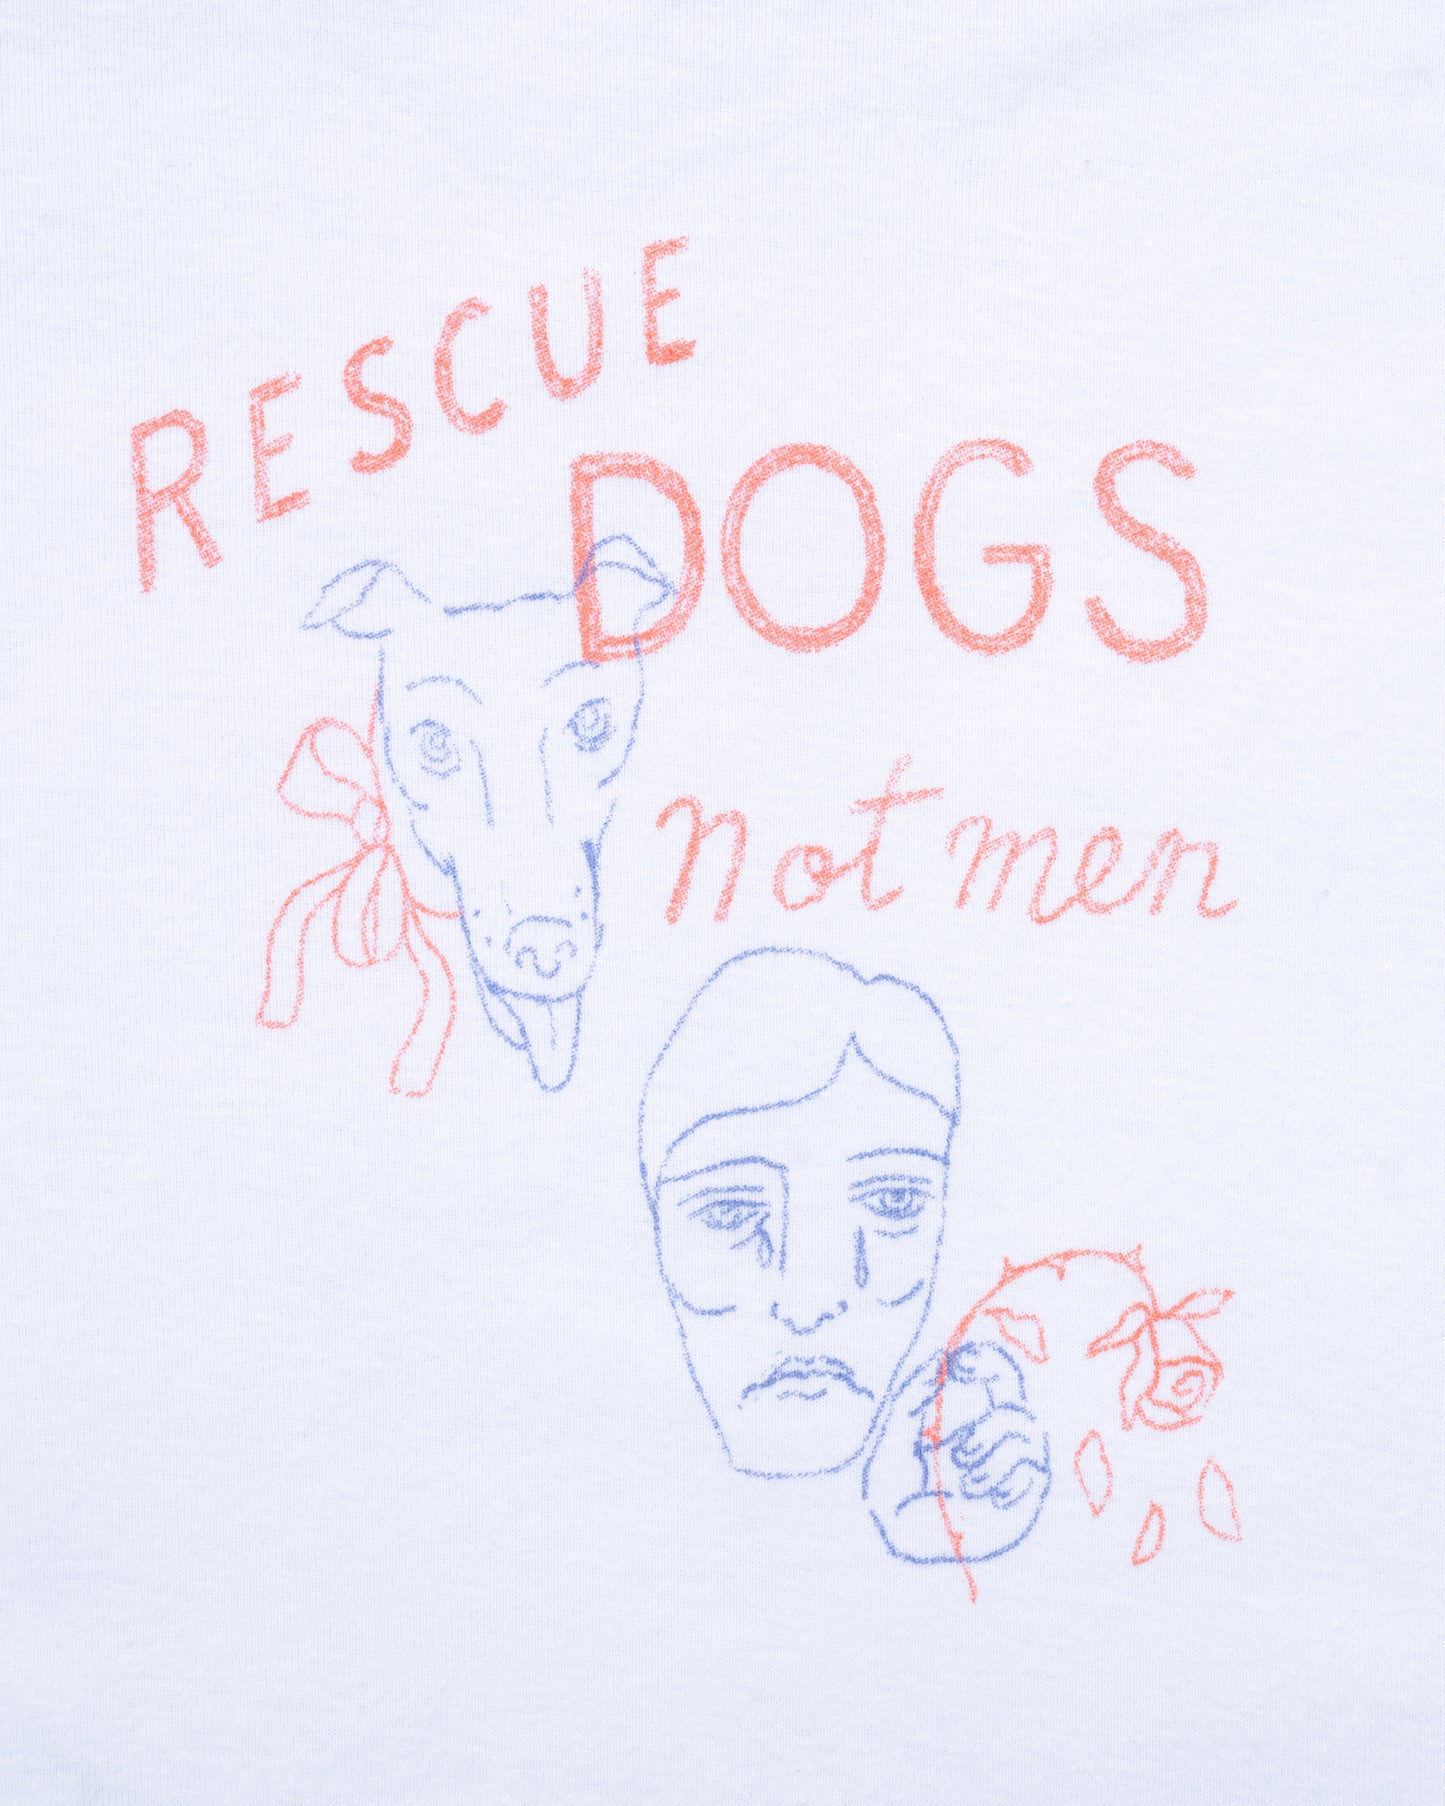 RESCUE DOGS NOT MEN TEE